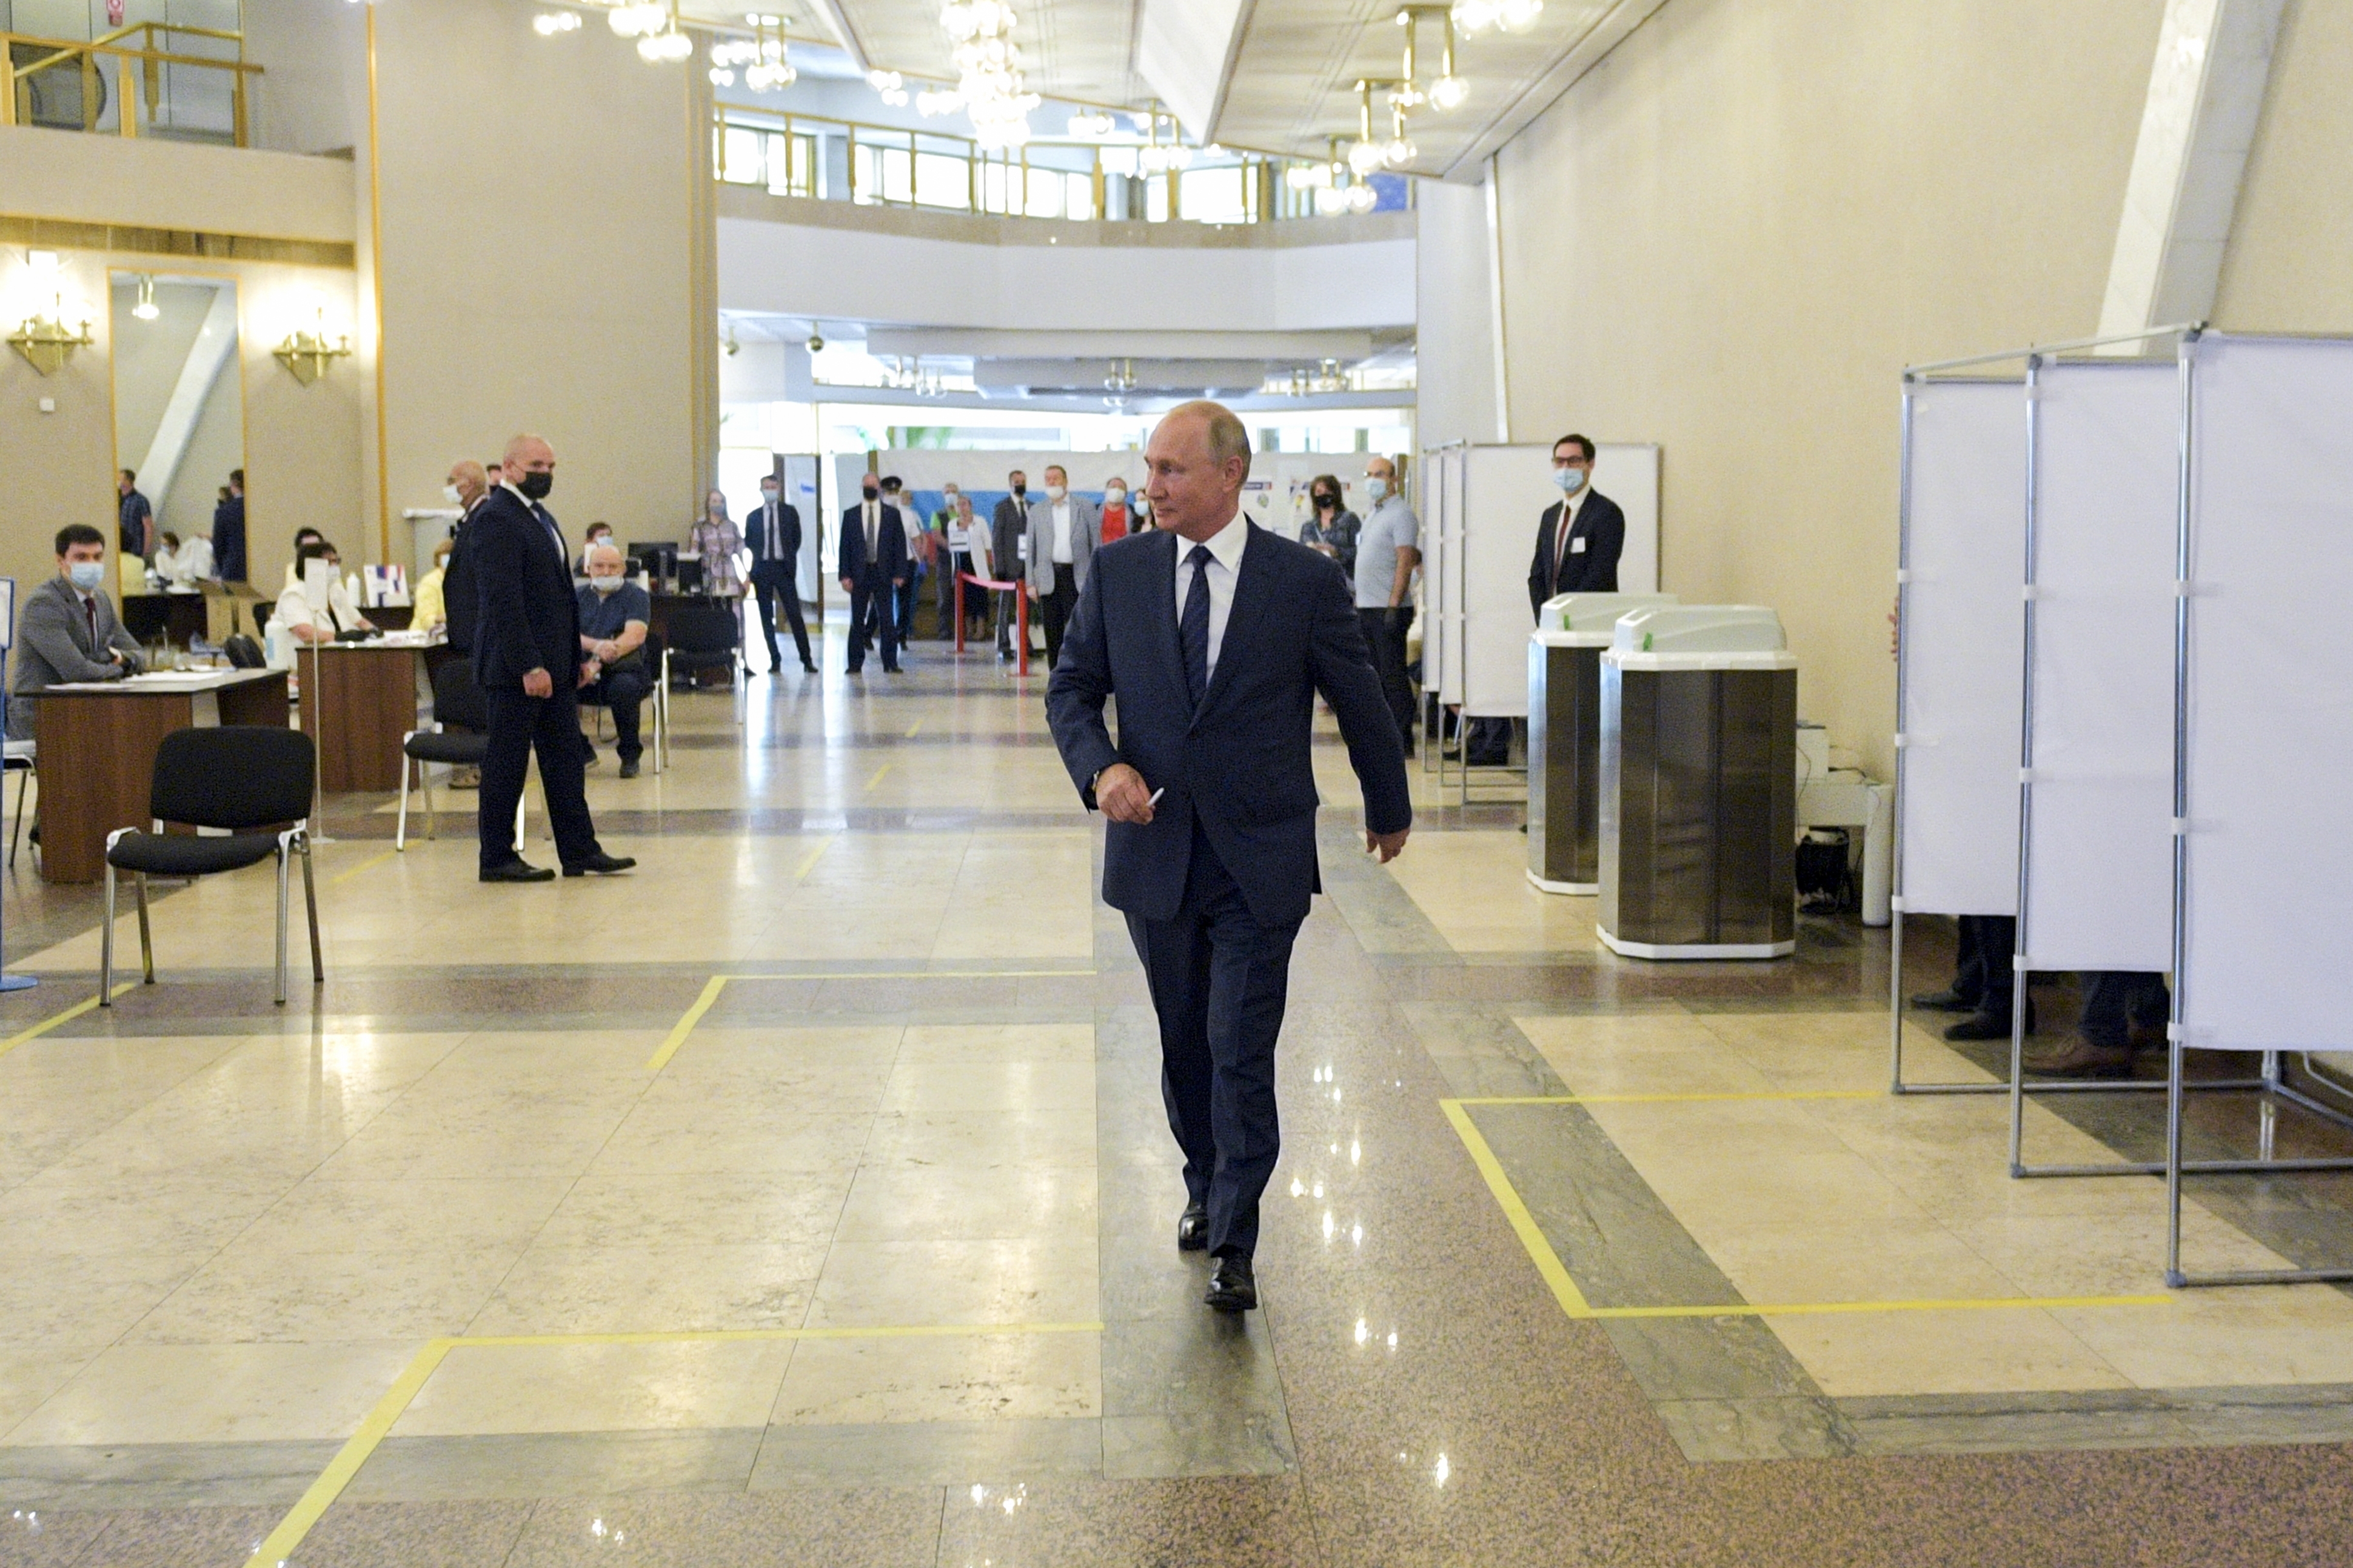 Russian President Vladimir Putin arrives to take part in voting at a polling station in Moscow, Russia, on Wednesday, July 1.